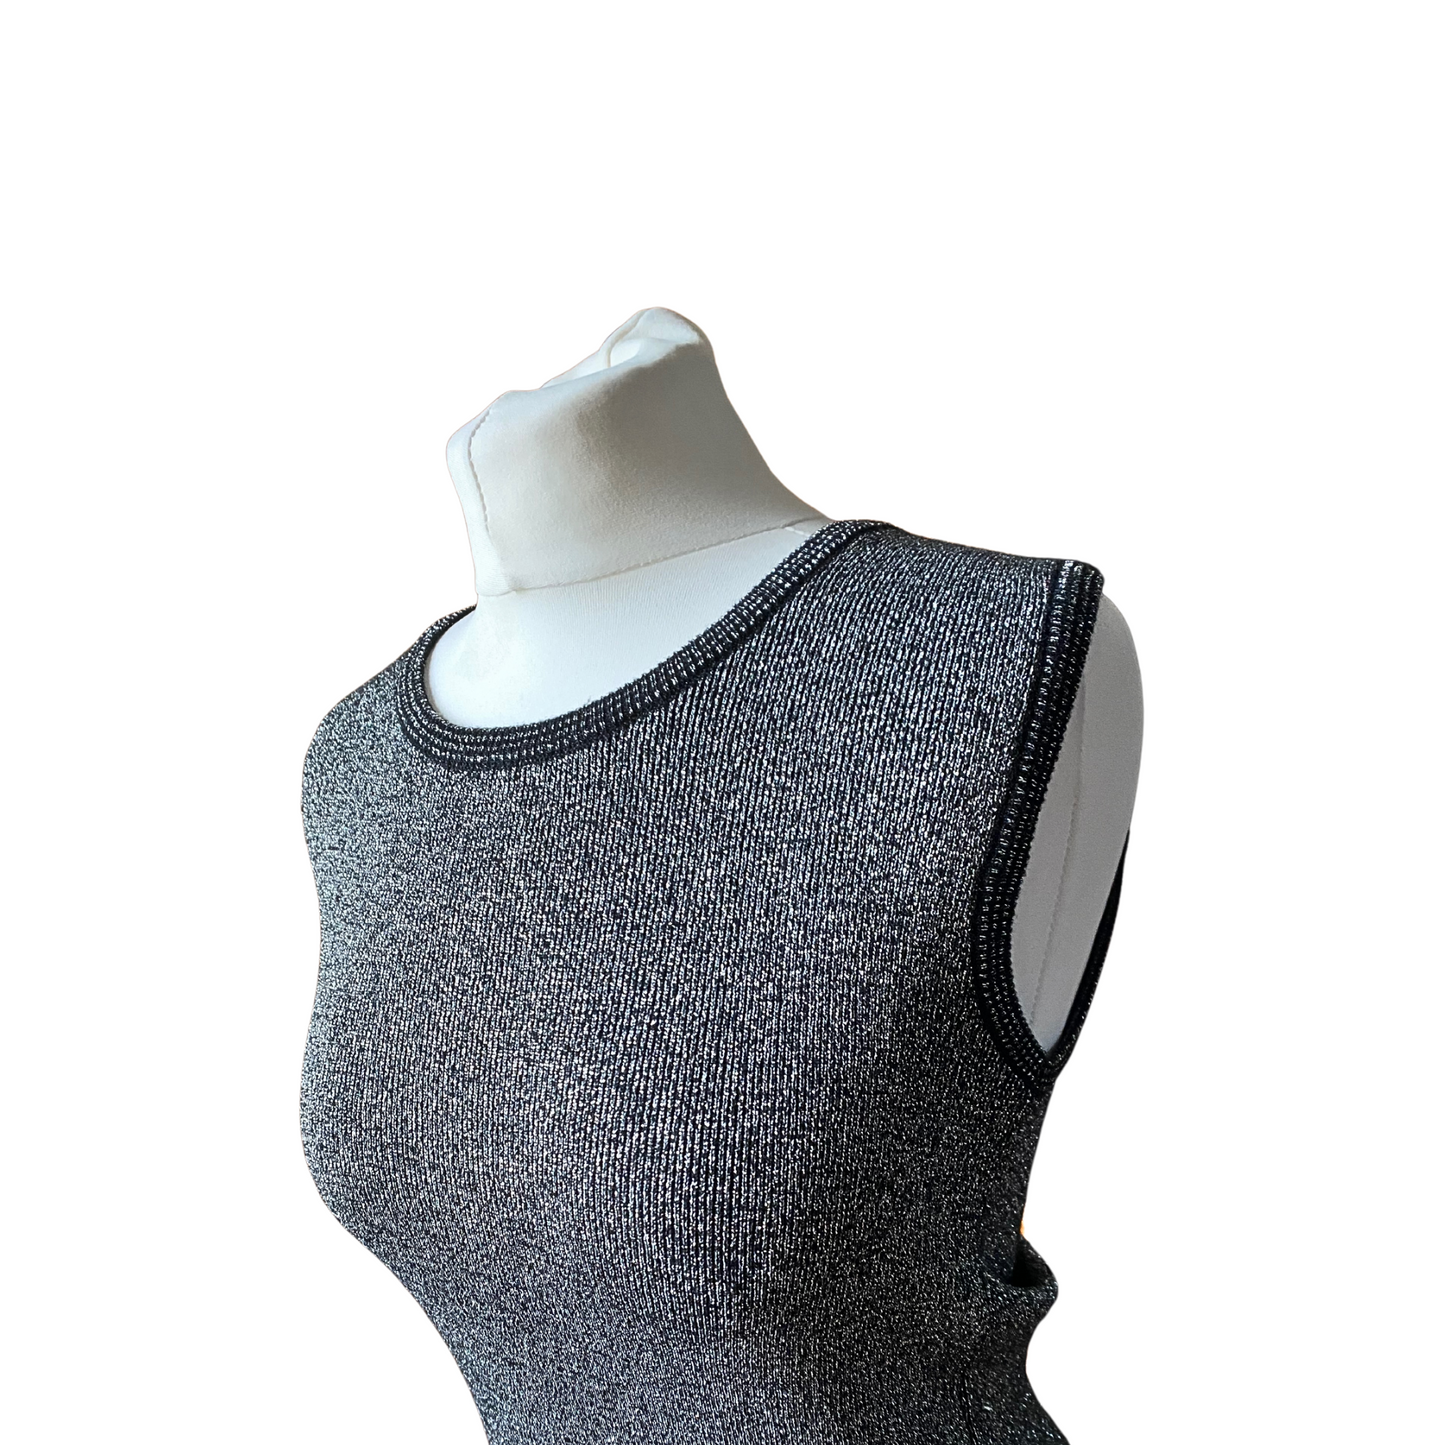 70s black and silvery sparkly tank top/sweater vest.  Approx  UK size 6-12